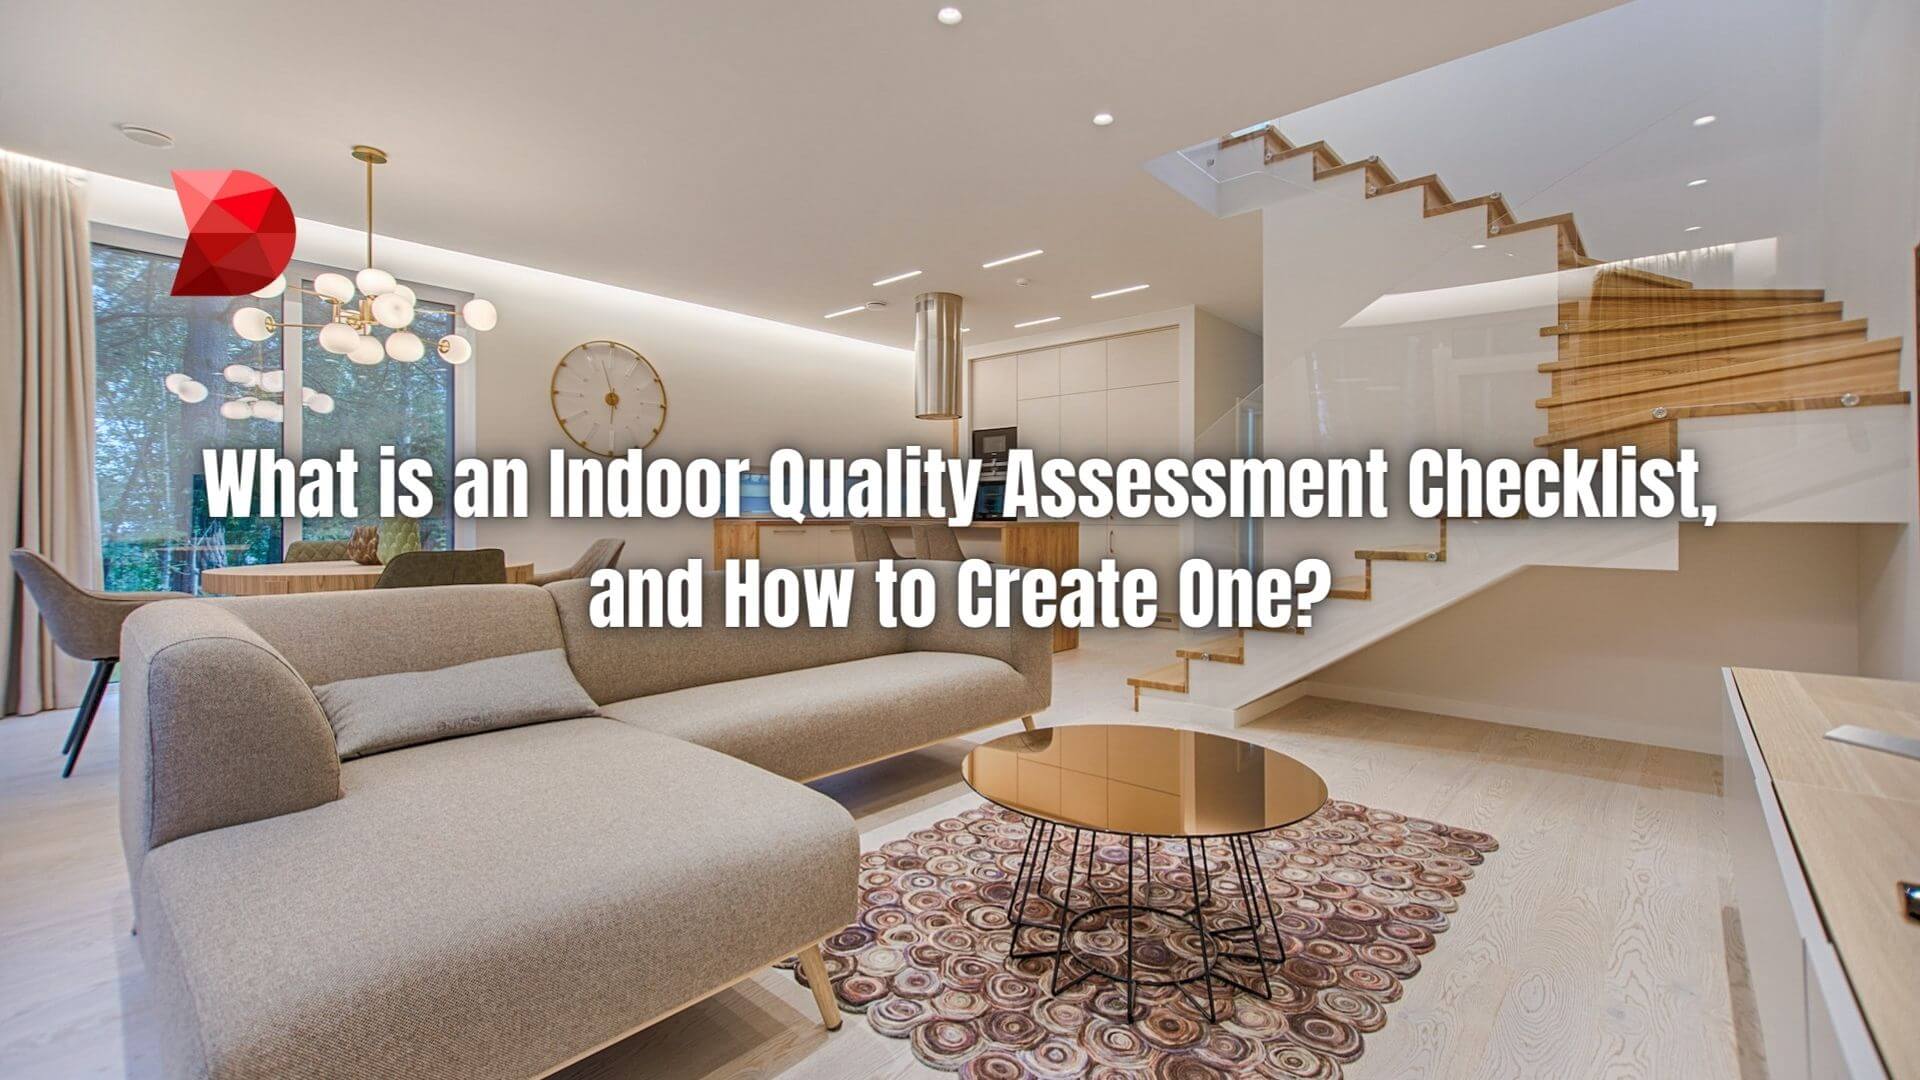 Creating an indoor air quality assessment checklist is paramount to ensuring the health and comfort of occupants. Click here to learn how!